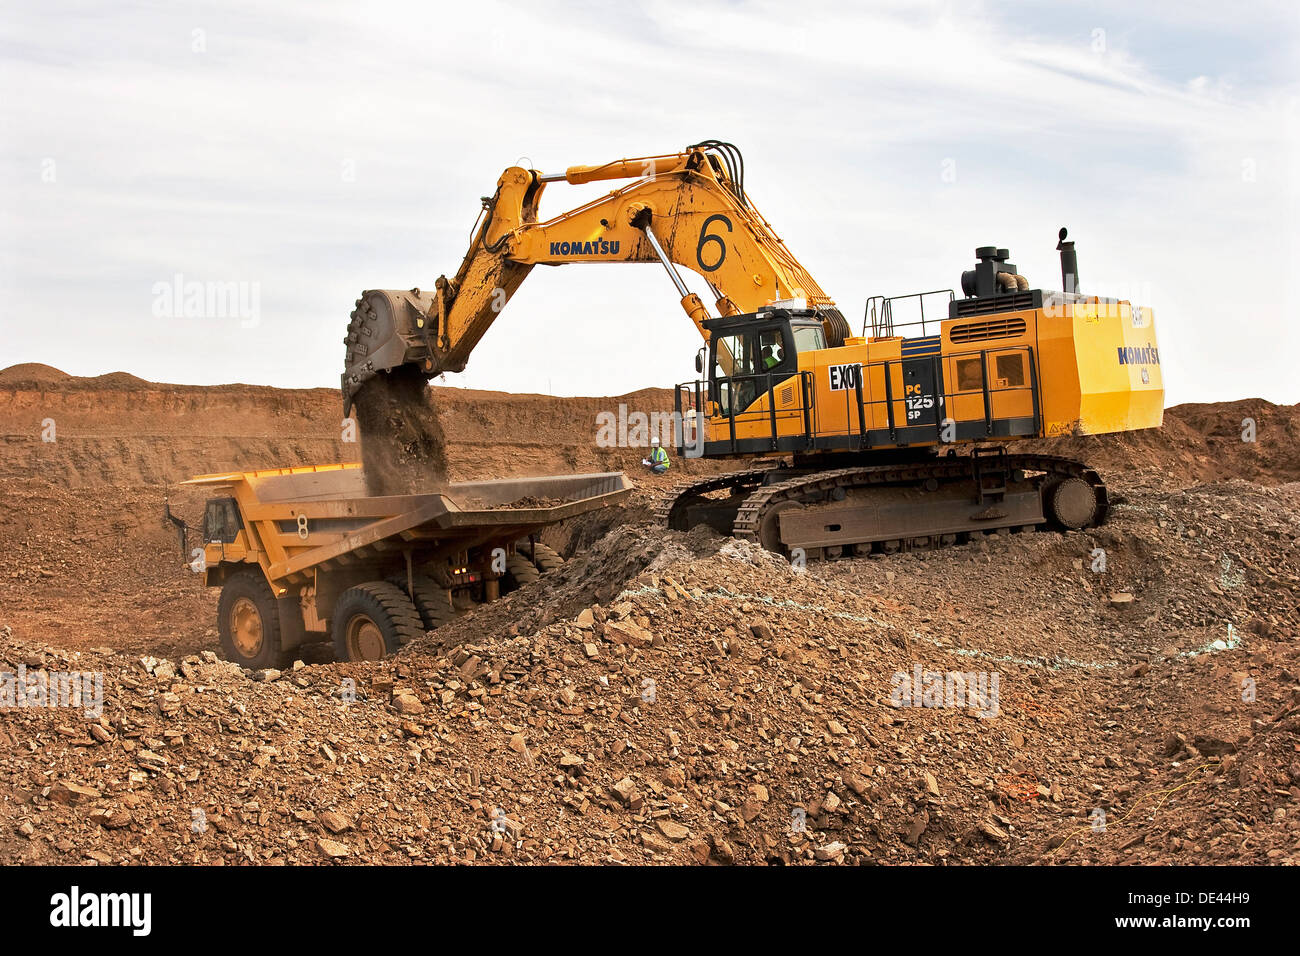 Gold mining in open cast surface pit with excavator and haul truck working, Mauritania, NW Africa Stock Photo